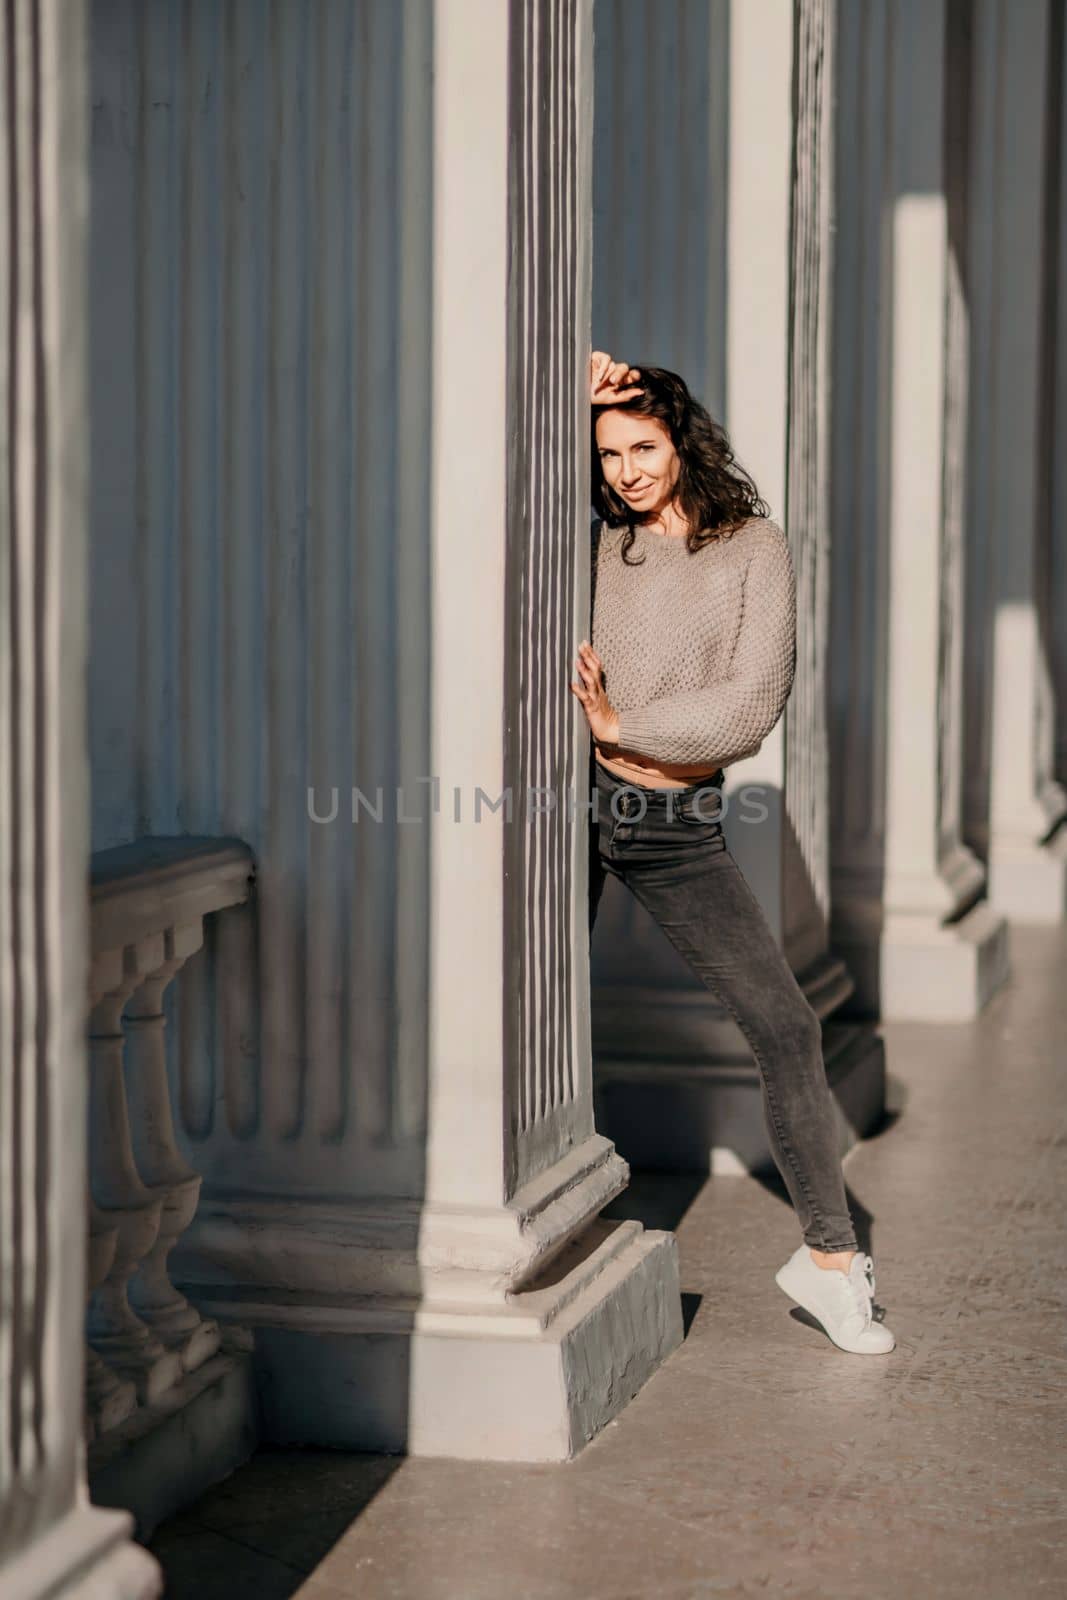 Woman building columns. An athletic woman in her 40s, dressed in a beige sweater and black jeans, poses near the pillars of a building. Walking around the city, tourism